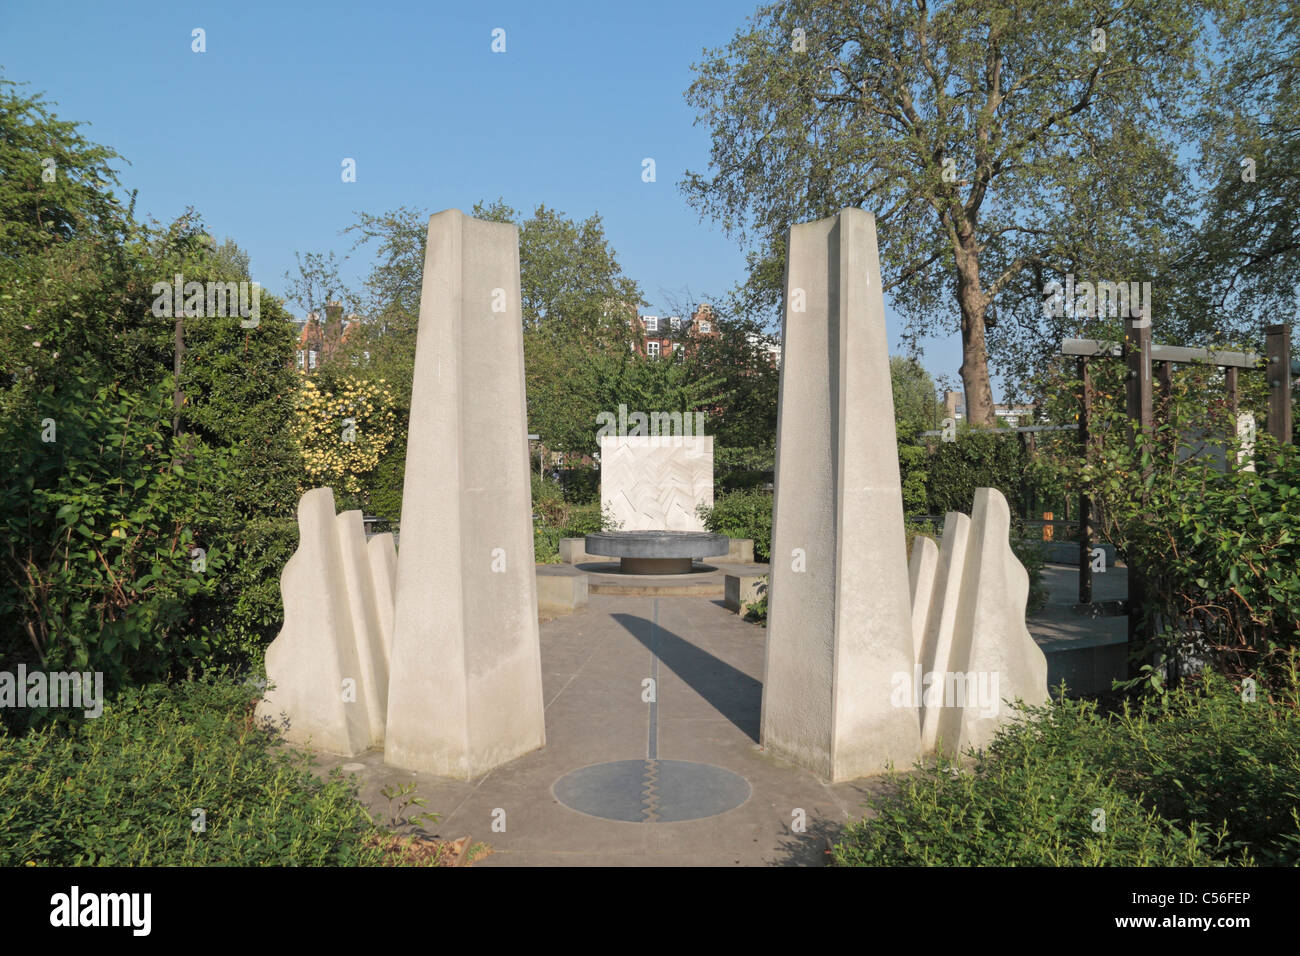 Entrance to the Tibetan Peace Garden (unveiled May 1999) in the grounds of the Imperial War Museum, London. Stock Photo